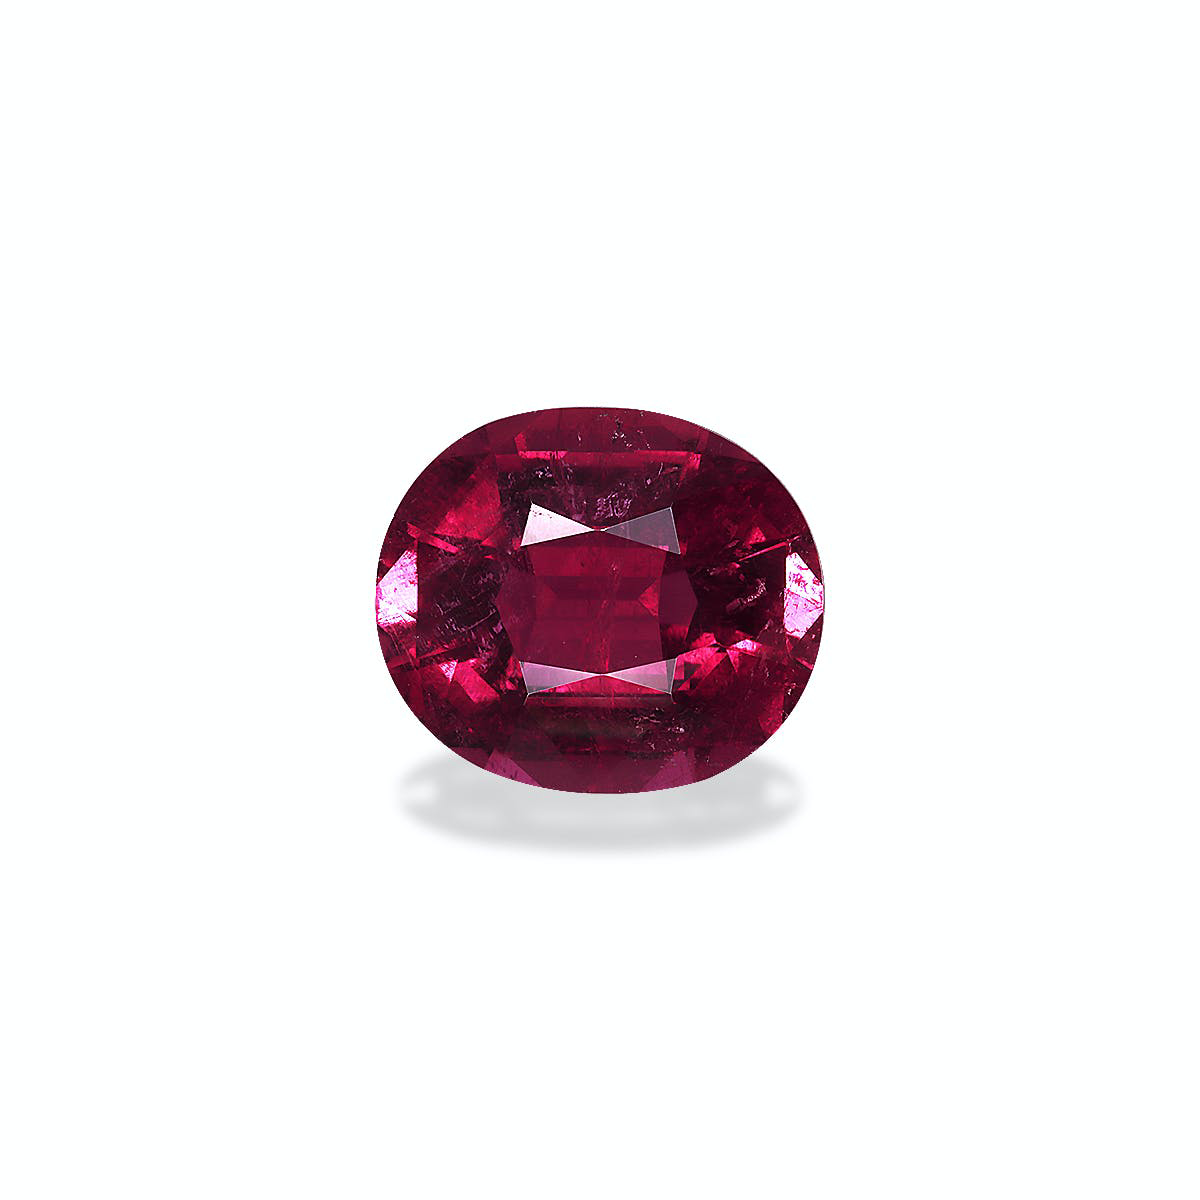 Picture of Cherry Red Rubellite Tourmaline 7.91ct - 14x12mm (RL0631)